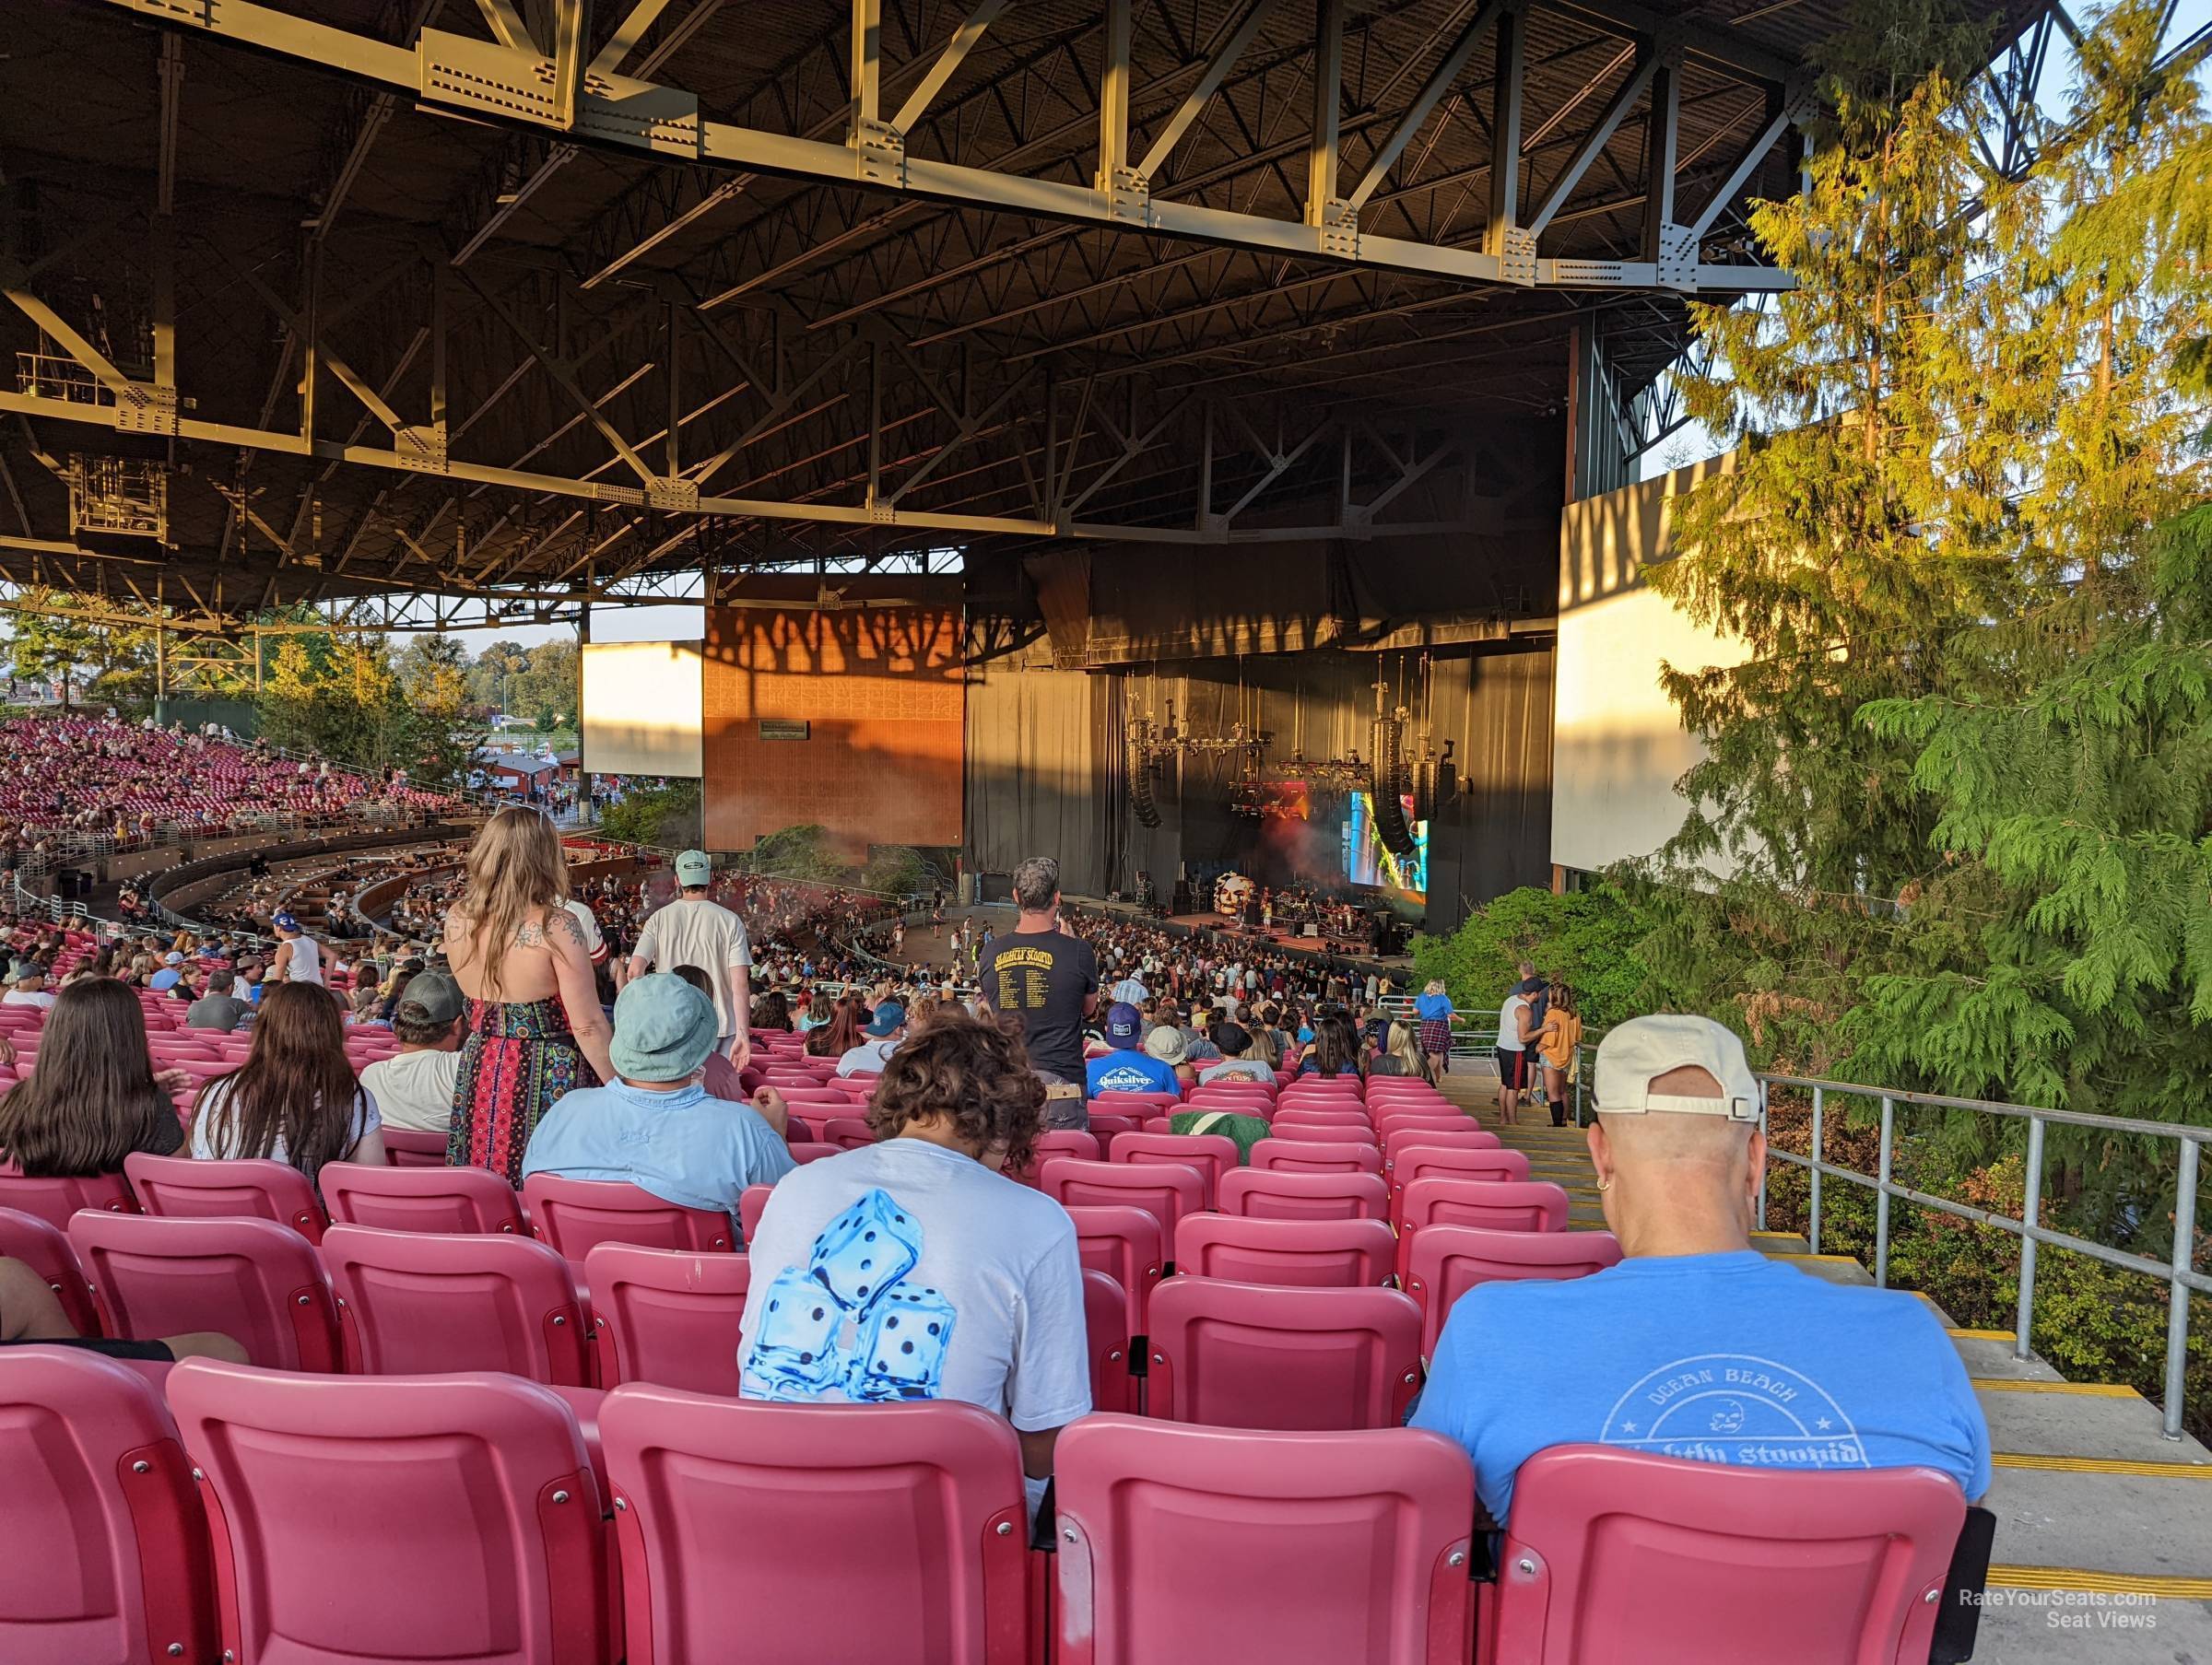 Section 201 at White River Amphitheatre